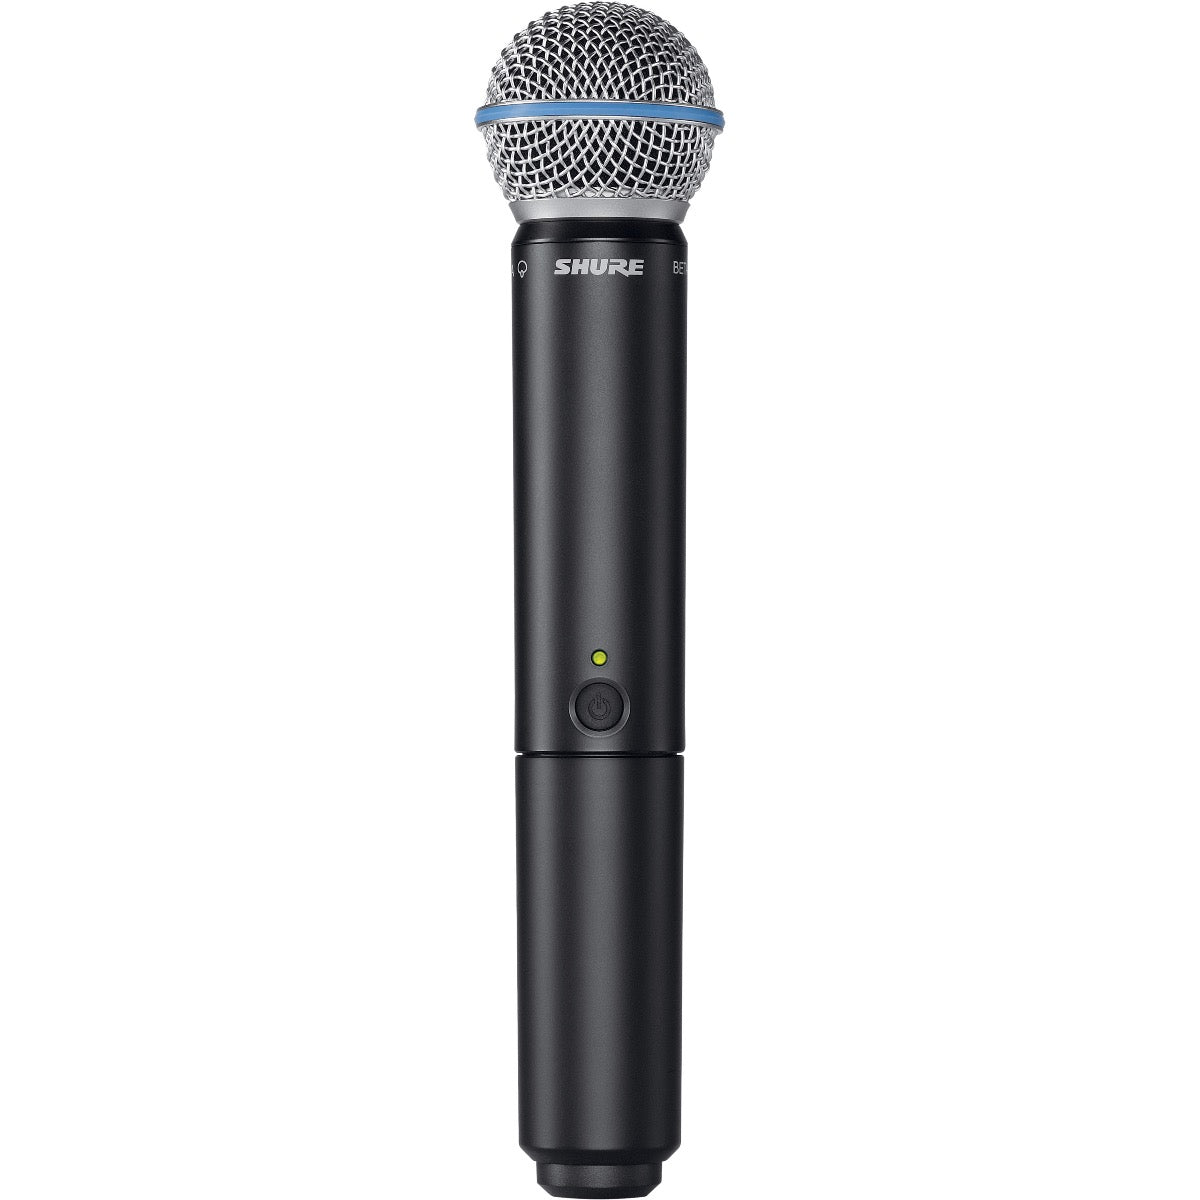 Front view of Shure BLX handheld microphone wireless transmitter with B58A capsule